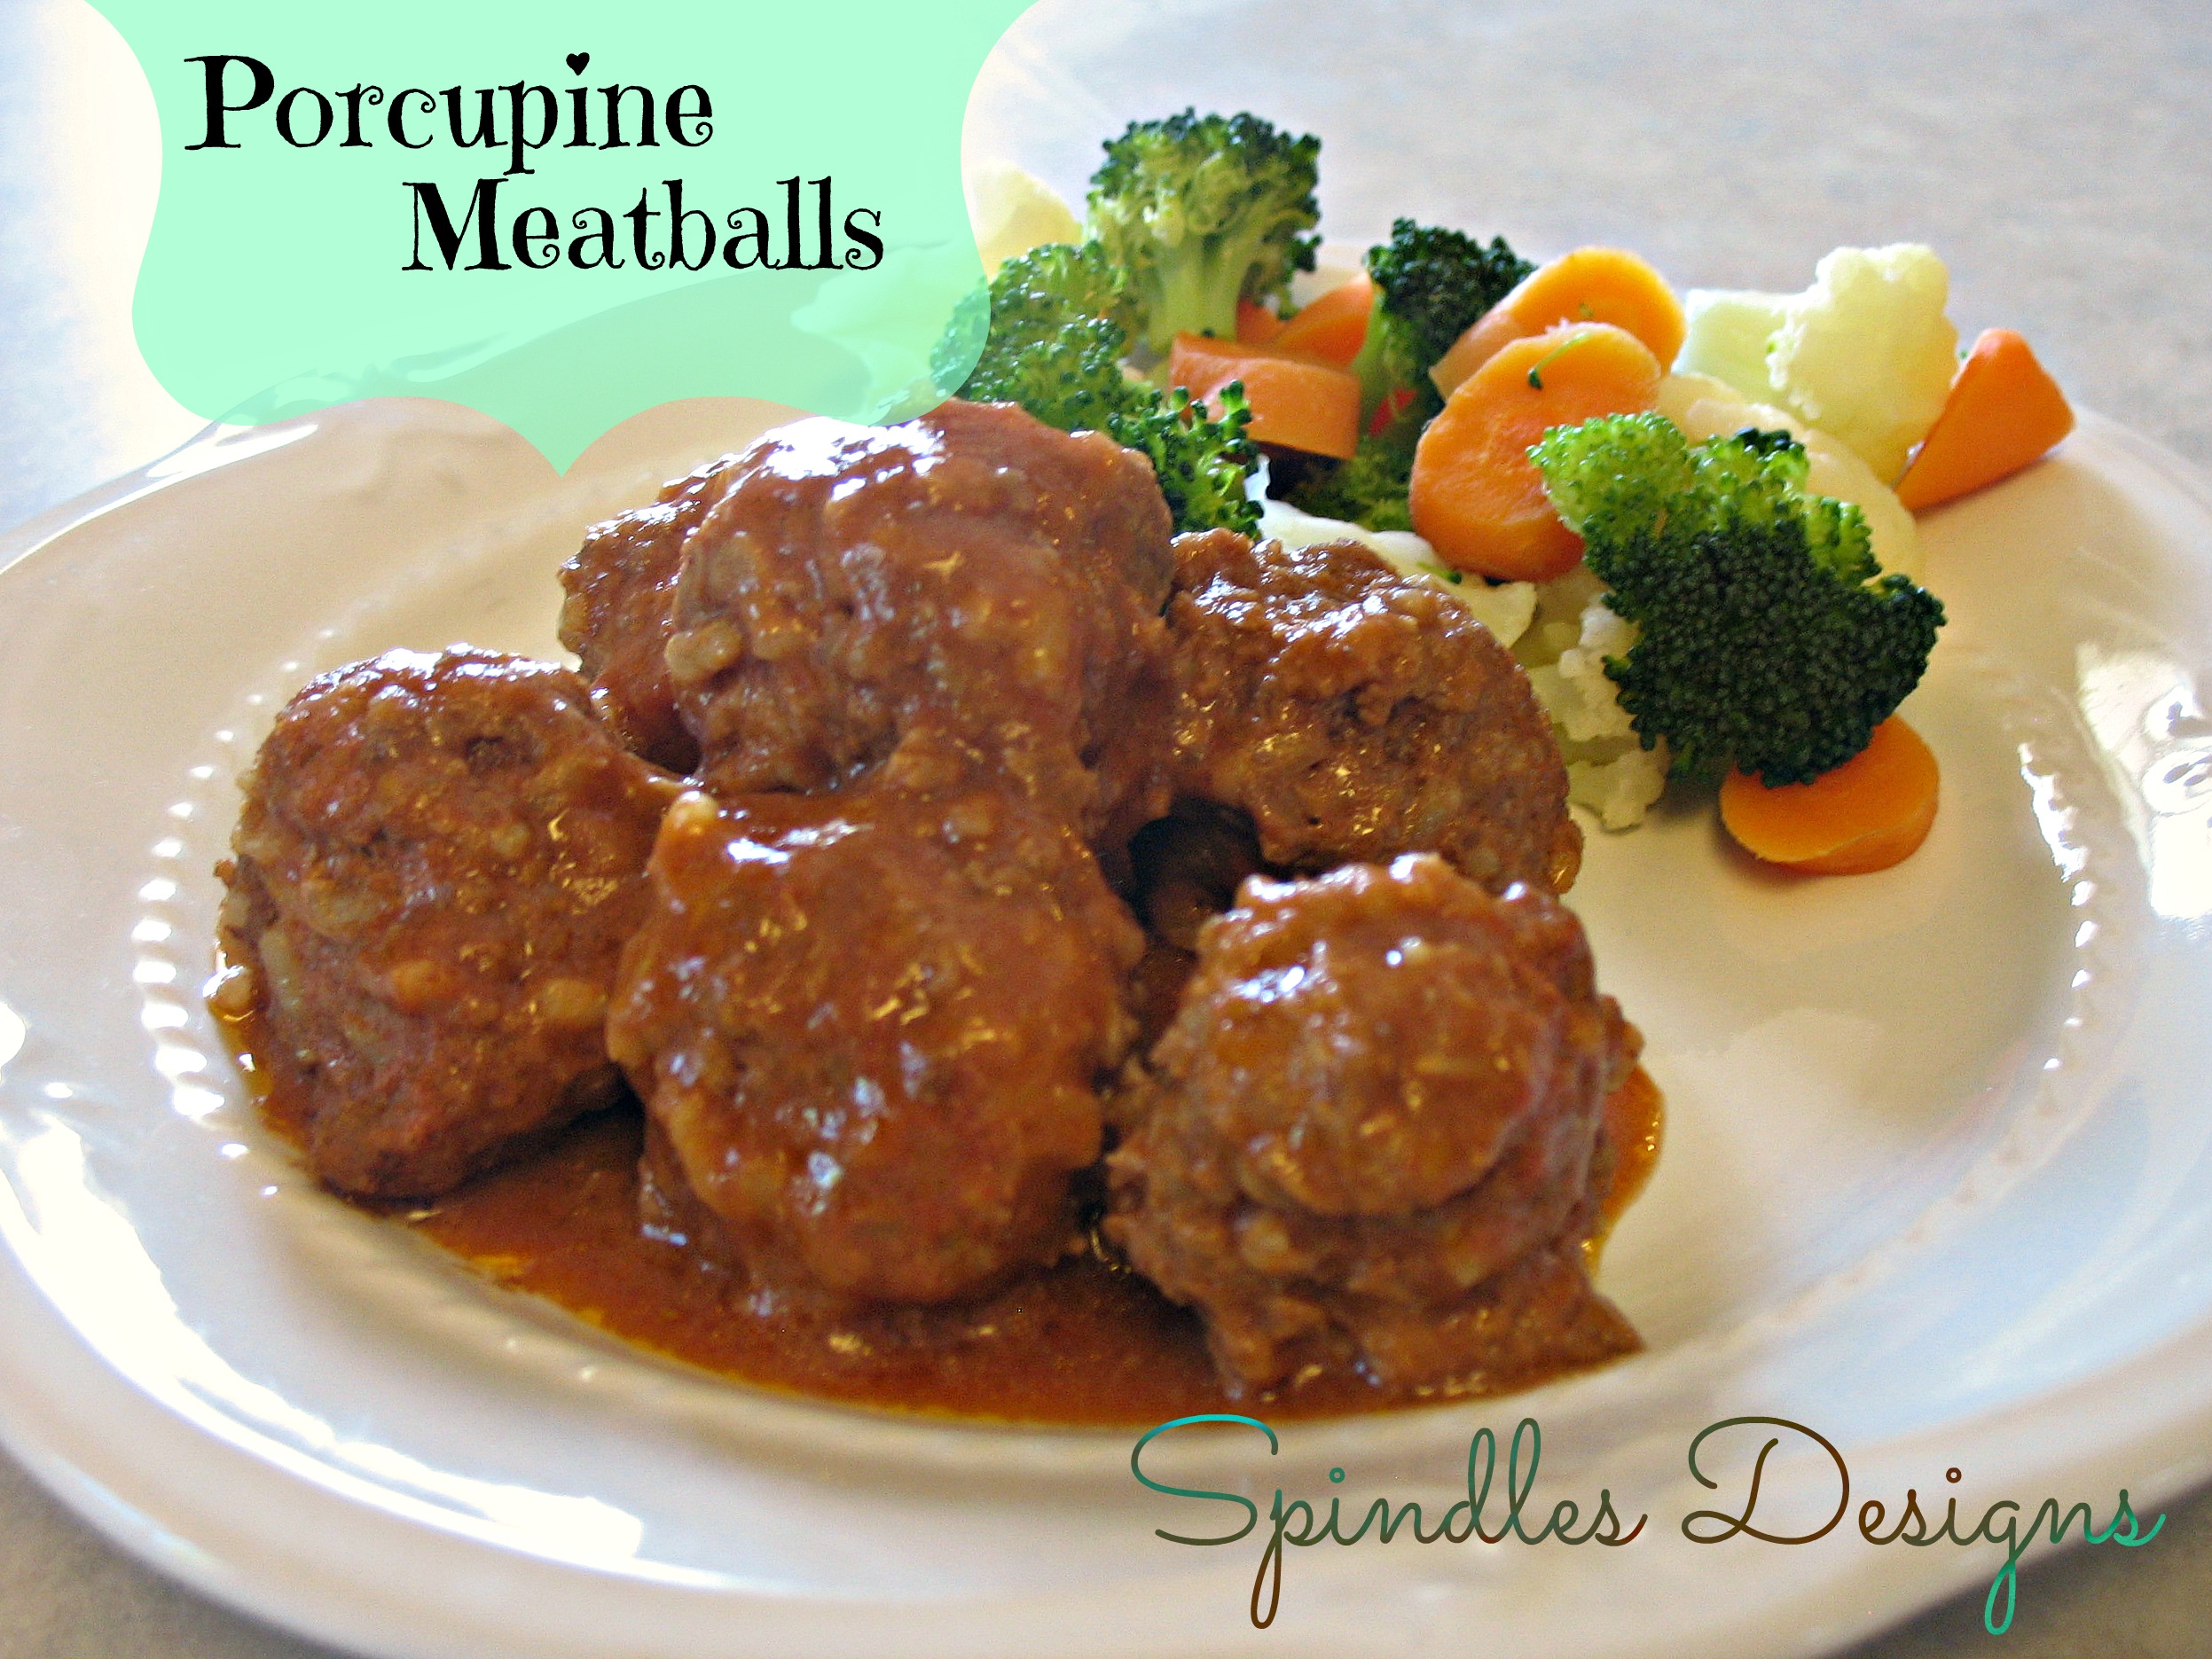 Porcupine Meatballs at www.spindlesdesigns.com